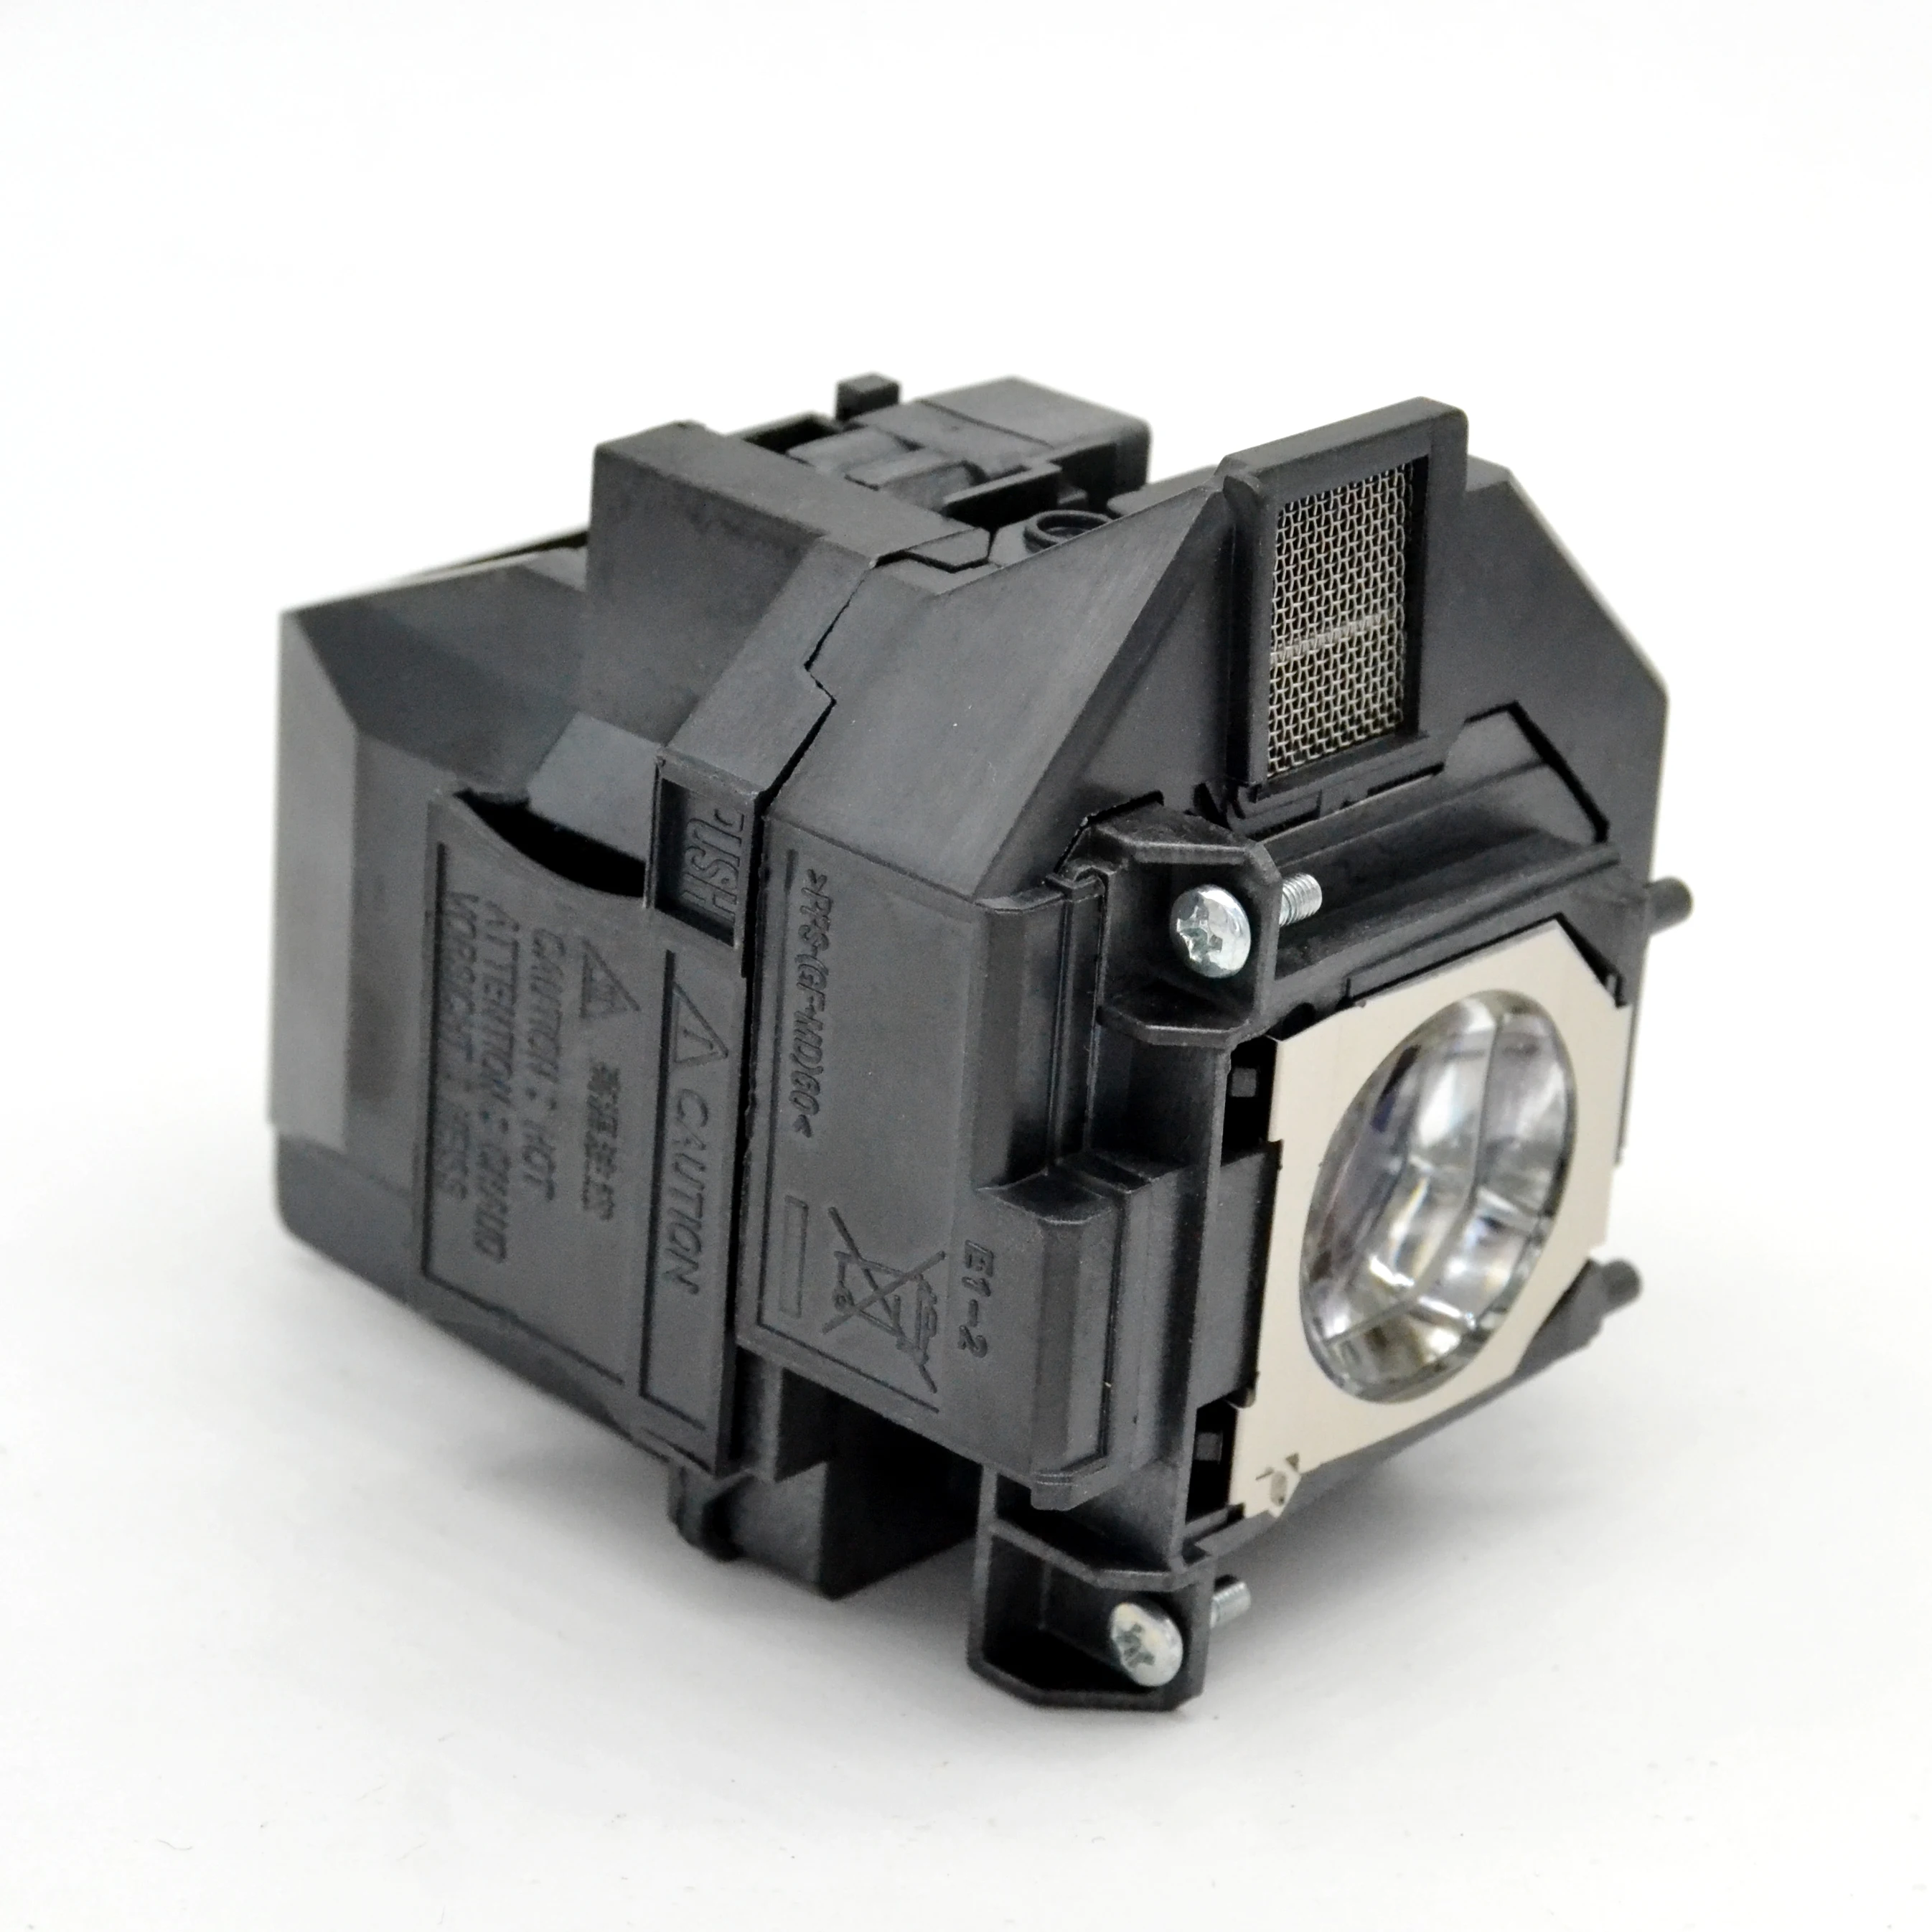 

Replacement Bare Projector Lamp Bulb For EPSON for ELPLP96 / V13H010L96 EB-W39 EB-W42 EB-X41 EB-W05 High Brightness